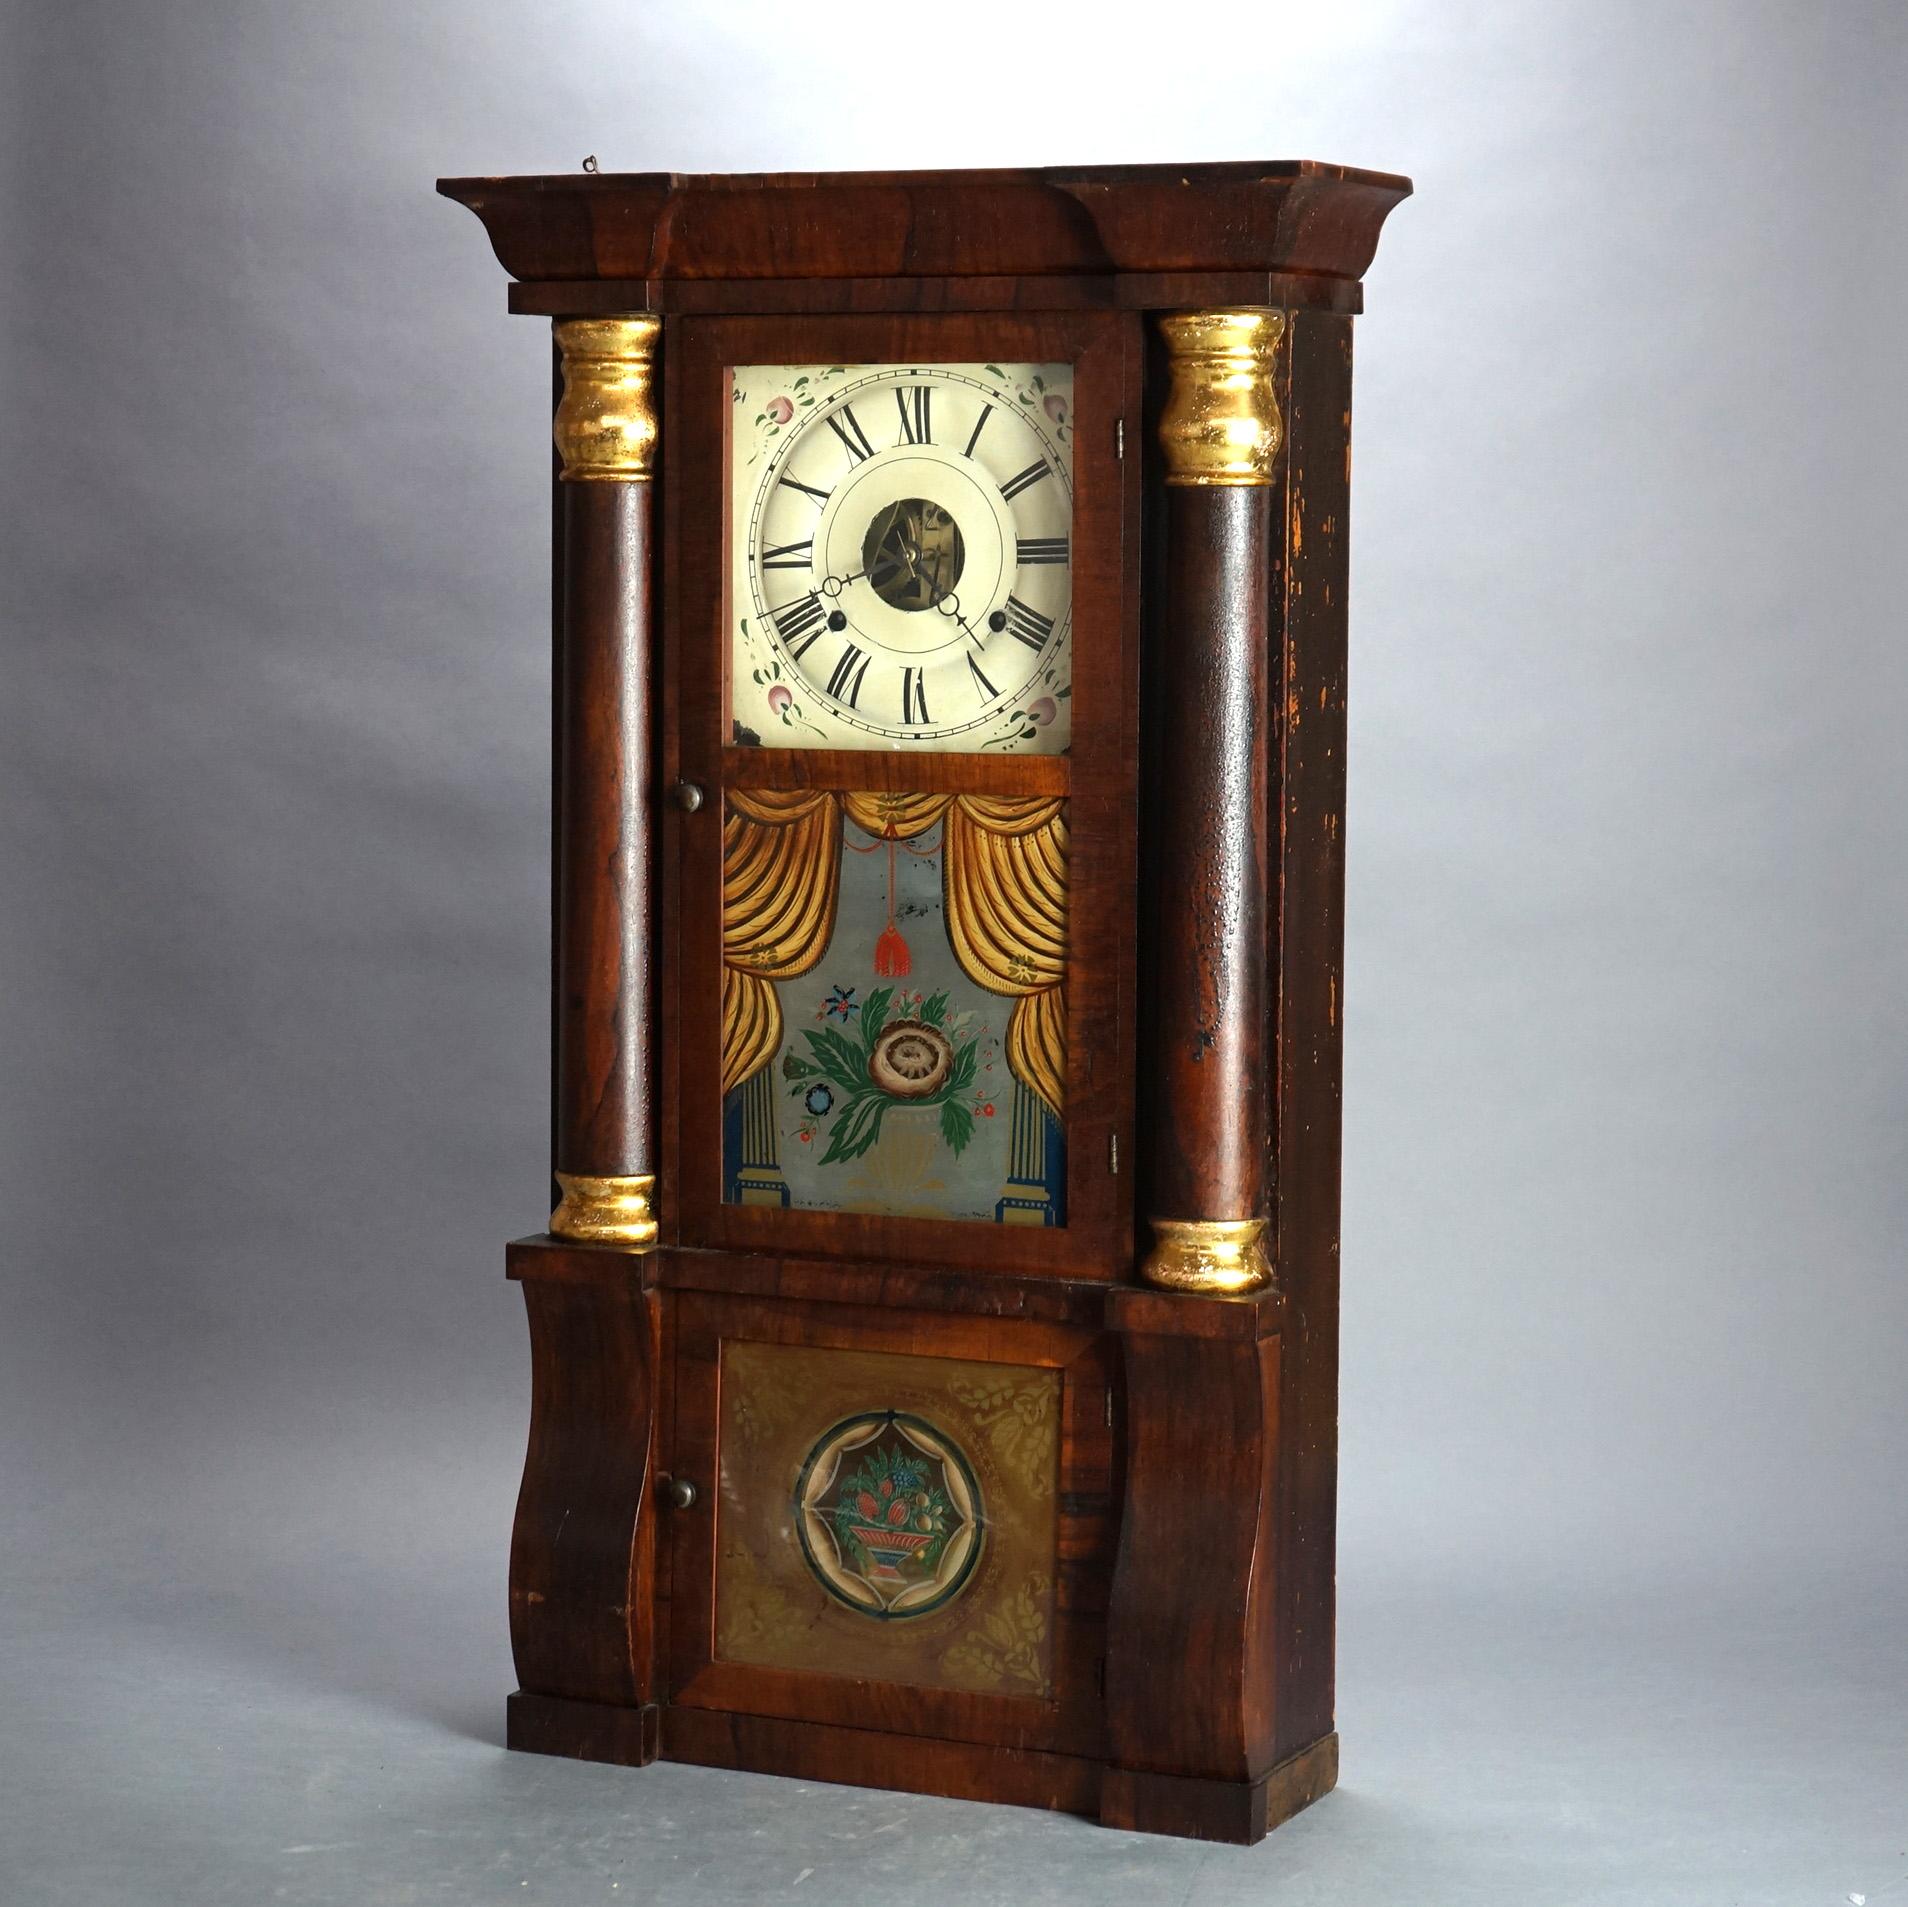 Antique Seth Thomas Flame Mahogany and Rosewood Open Escapement Mantel Clock with Flanking Columns and Eglomise Panel with Basket of Flowers, C1840

Measures - 32.5